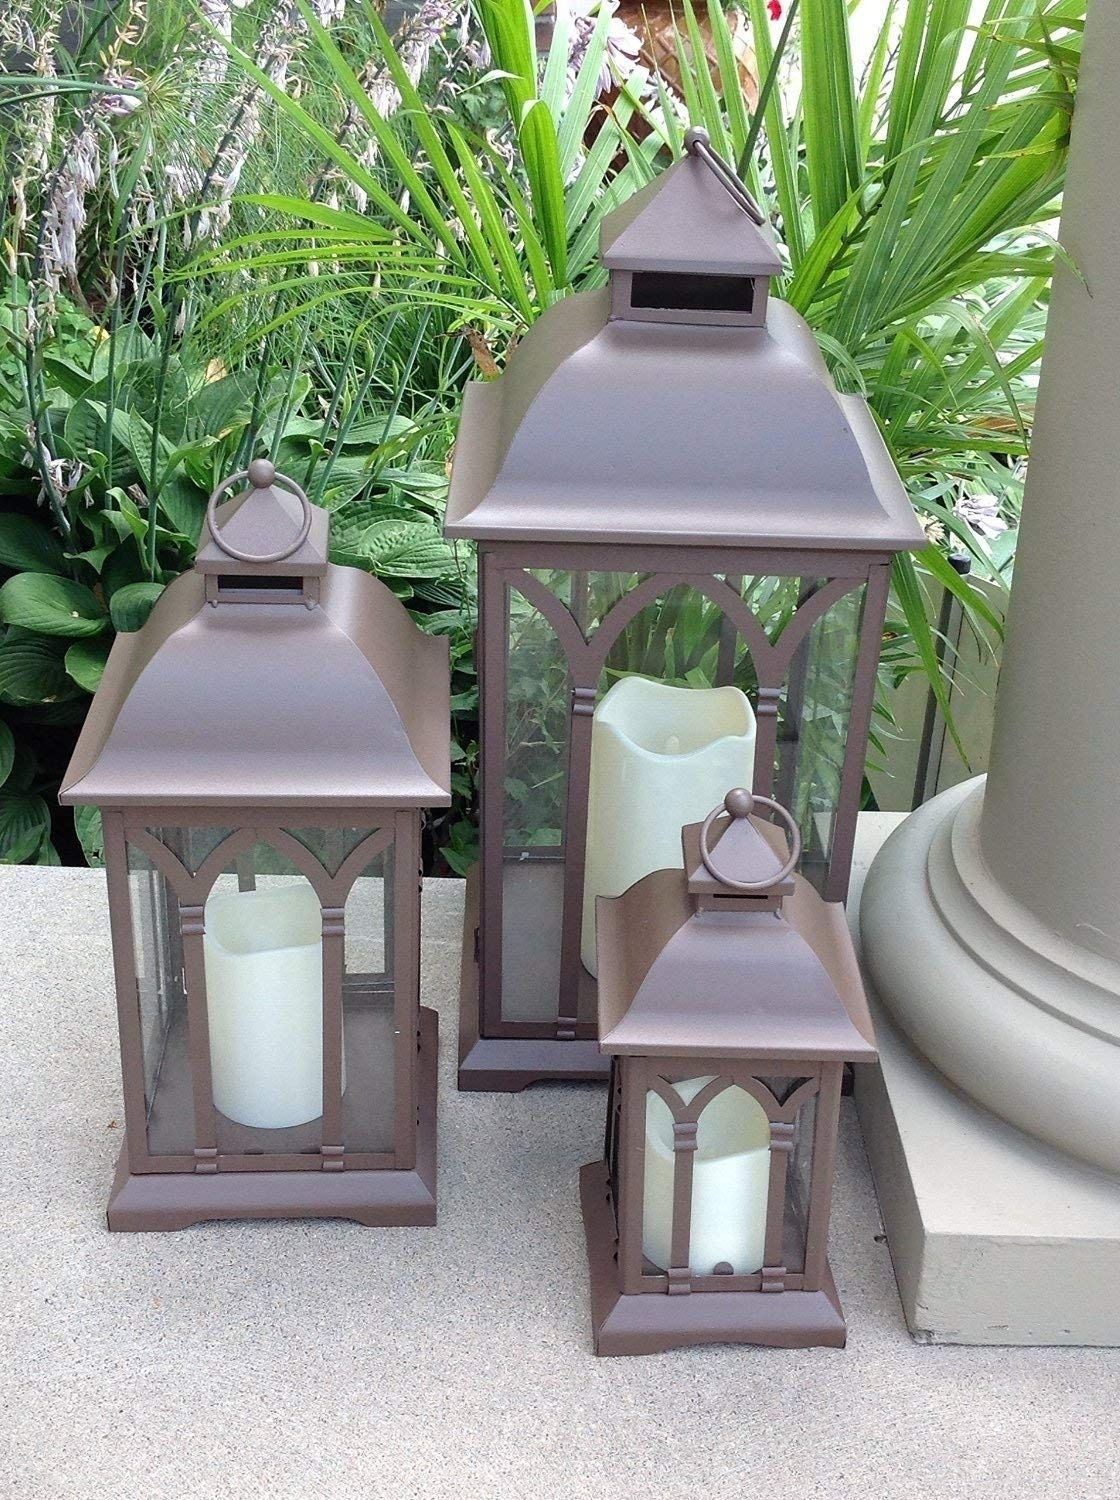 Amazon : Pebble Lane Living 3pc Set Of Outdoor Large Indoor Or Intended For Outdoor Bronze Lanterns (View 17 of 20)